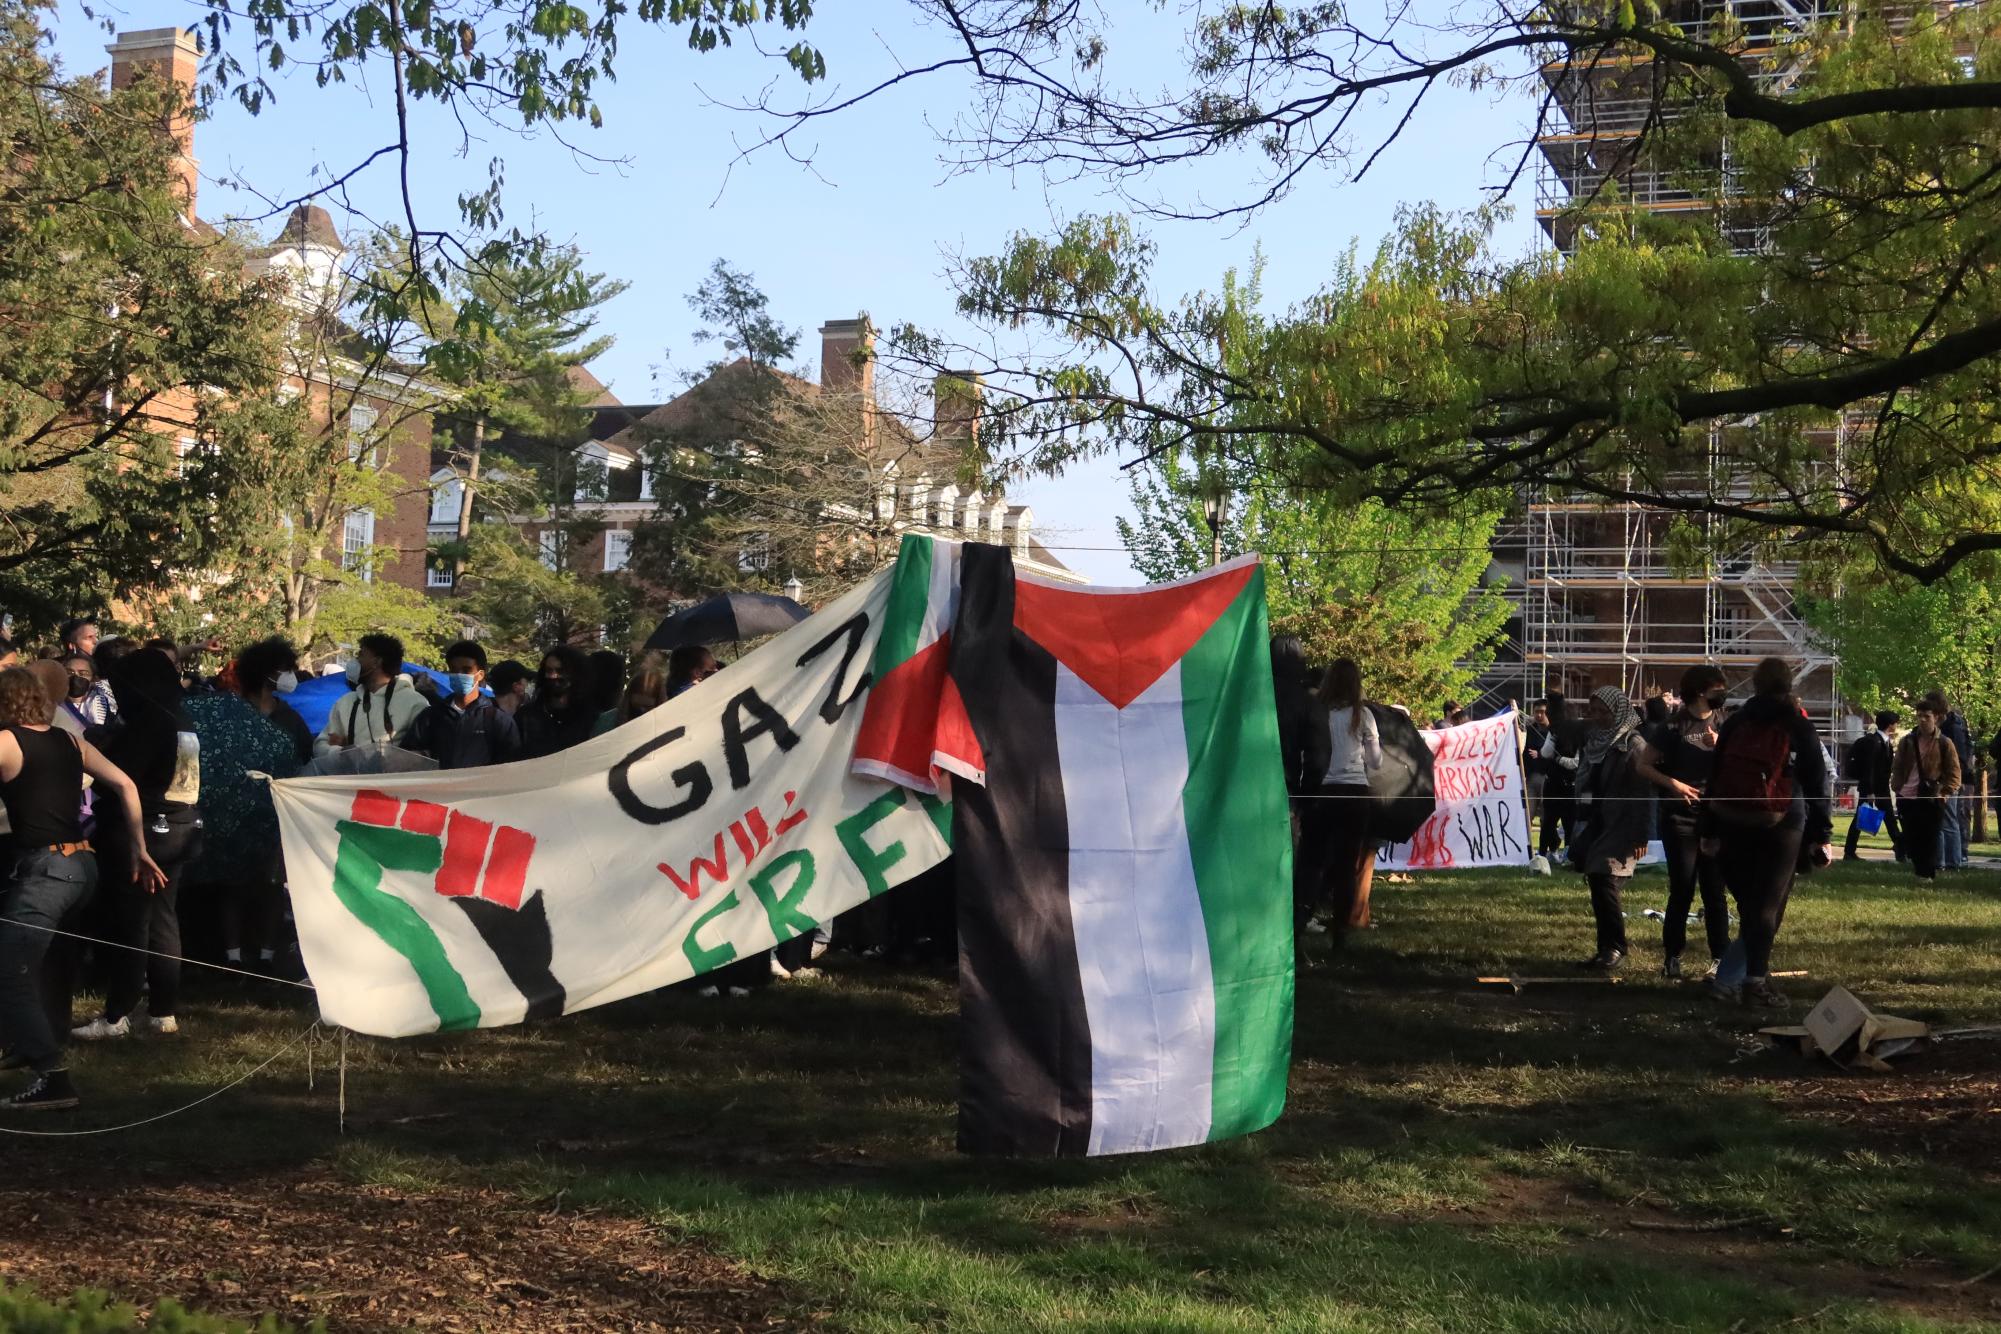 A flag of Palestine hangs from a tree on the north side of the demonstration.